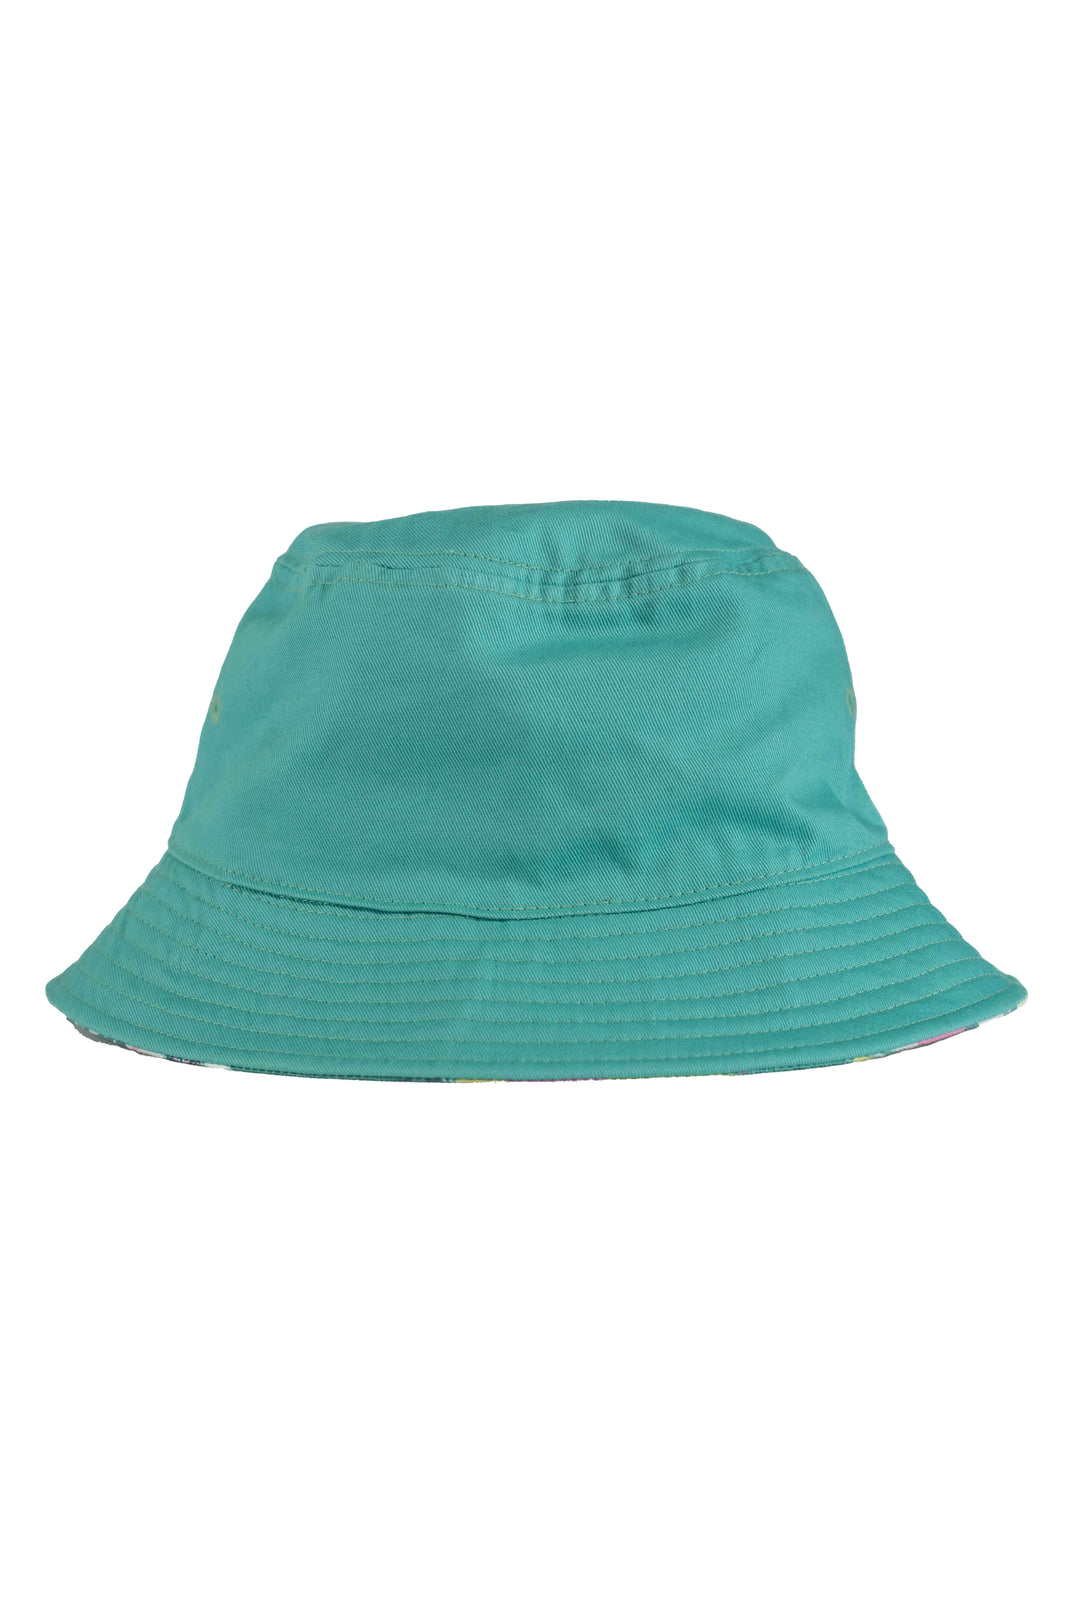 Growth All Over Print Reversible Bucket Hat